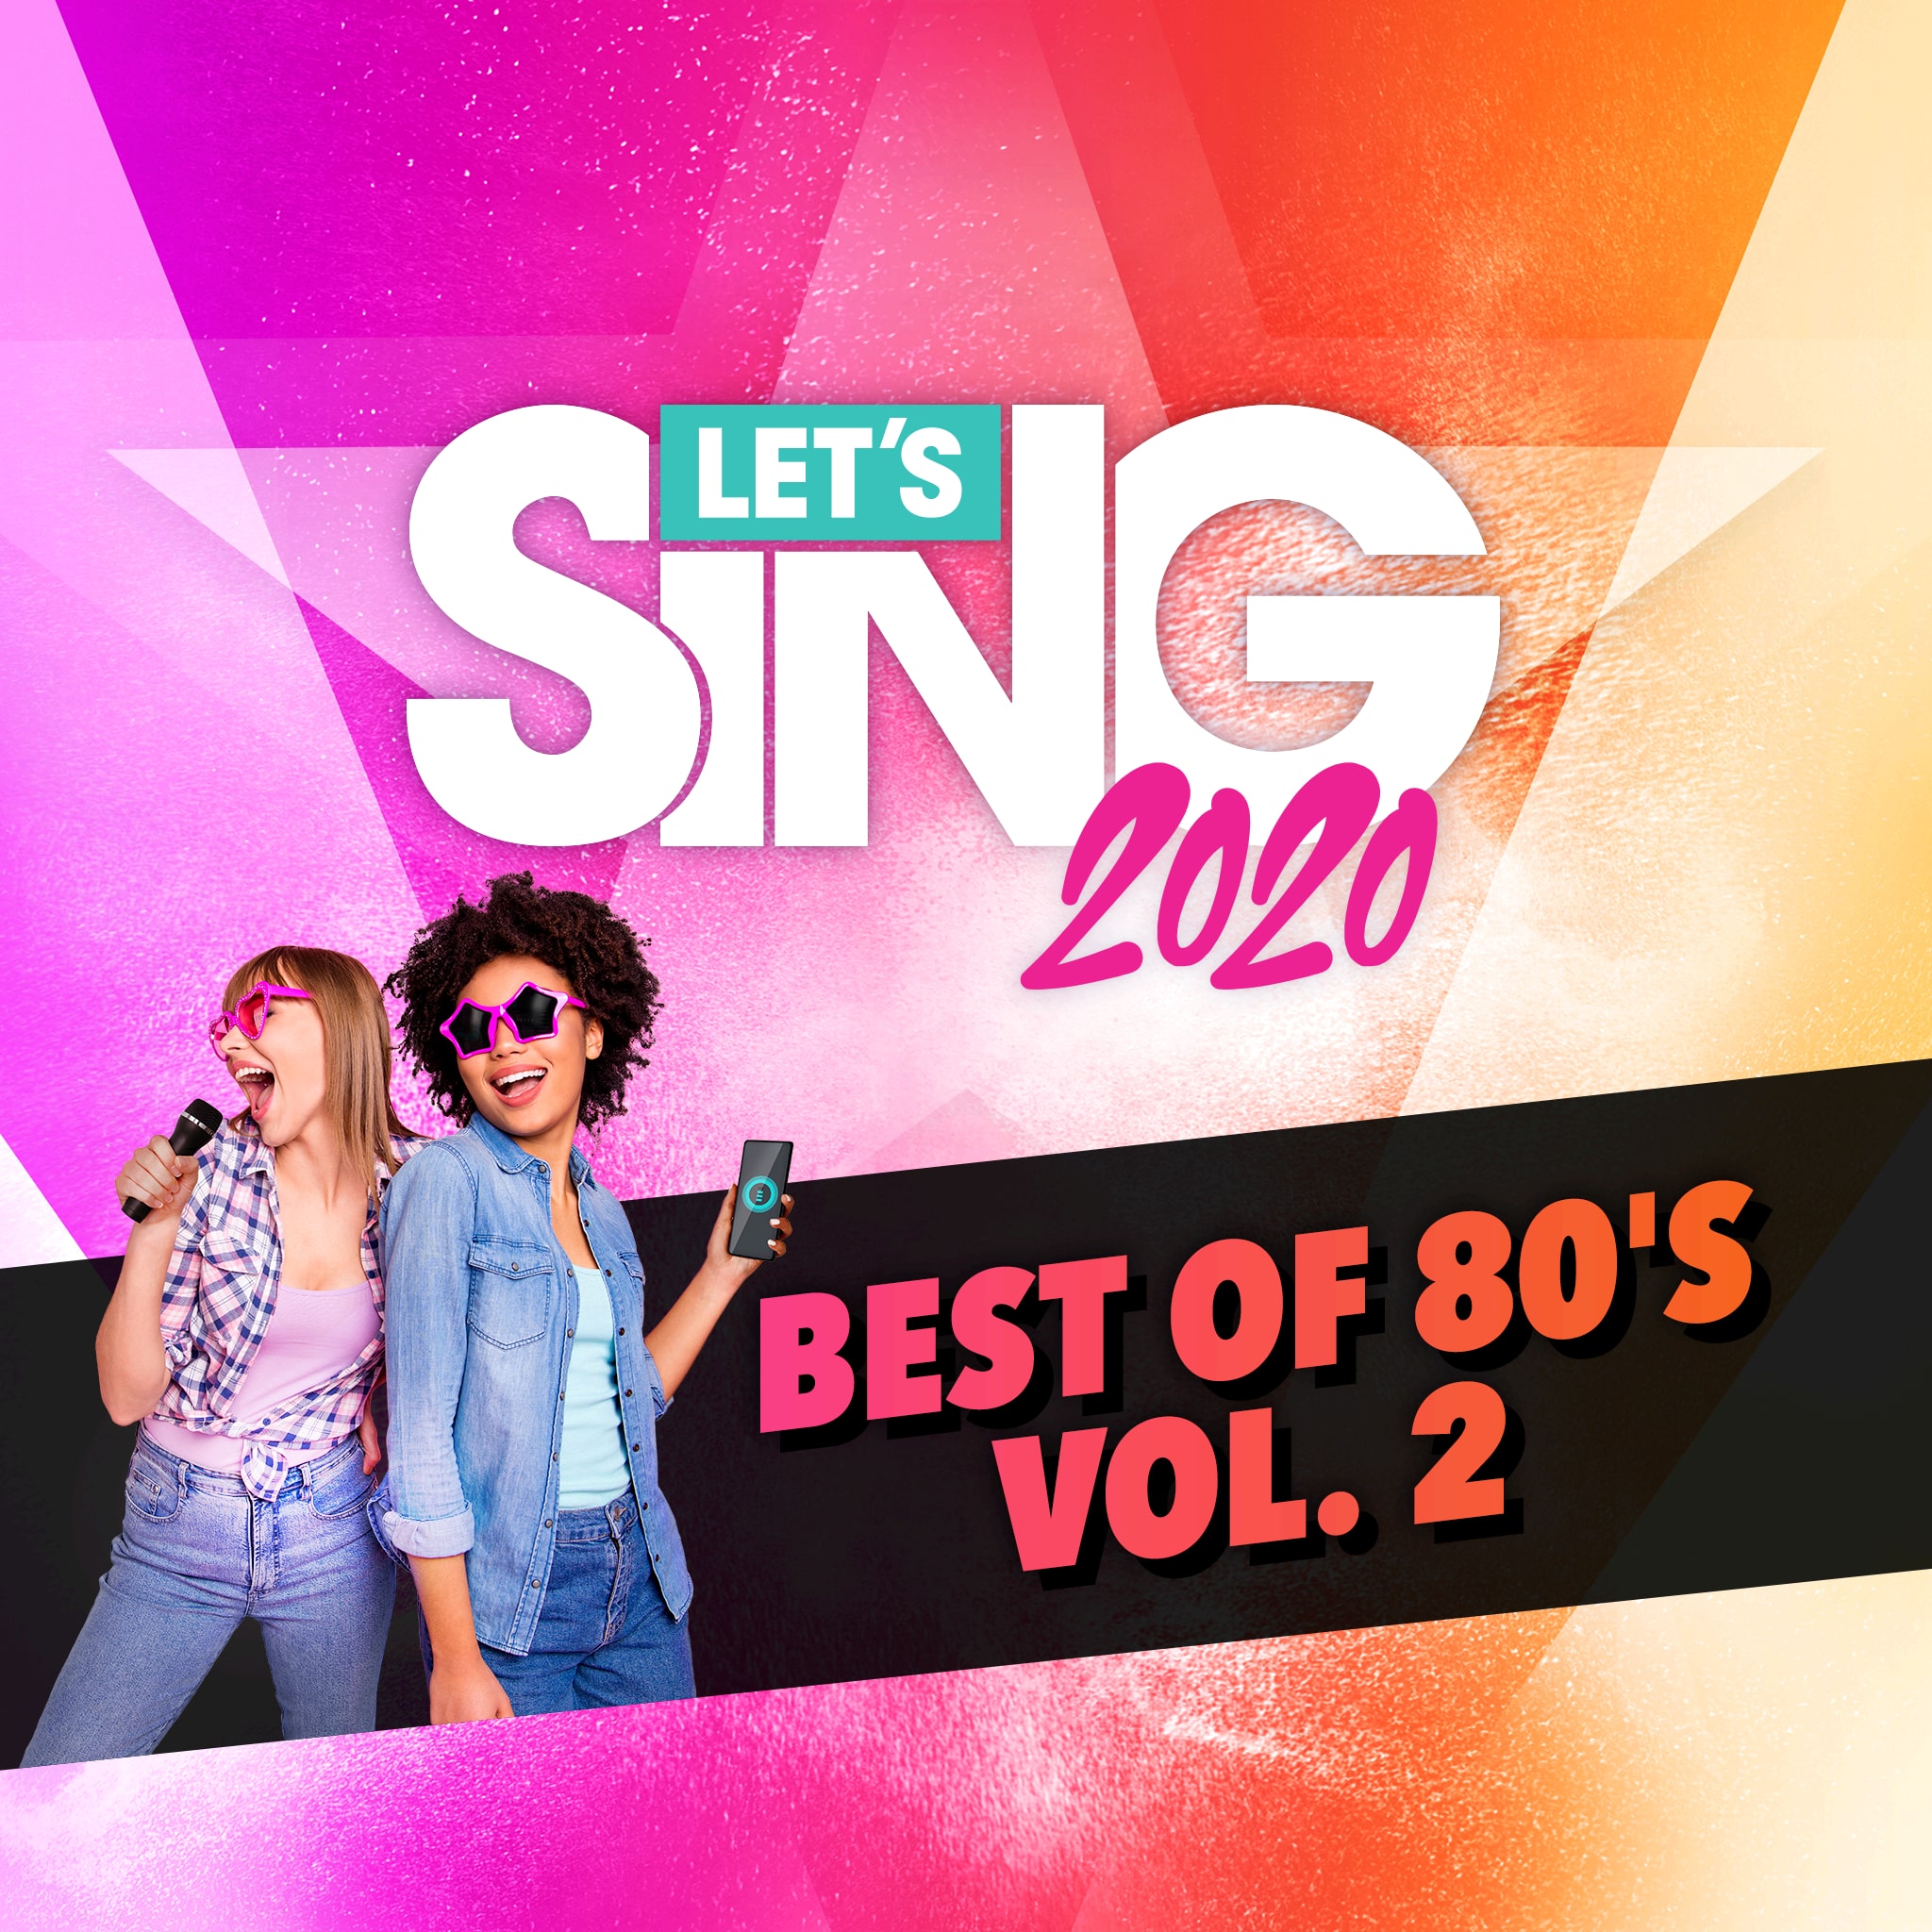 Let's Sing 2020 - Best of 80's Vol. 2 Song Pack